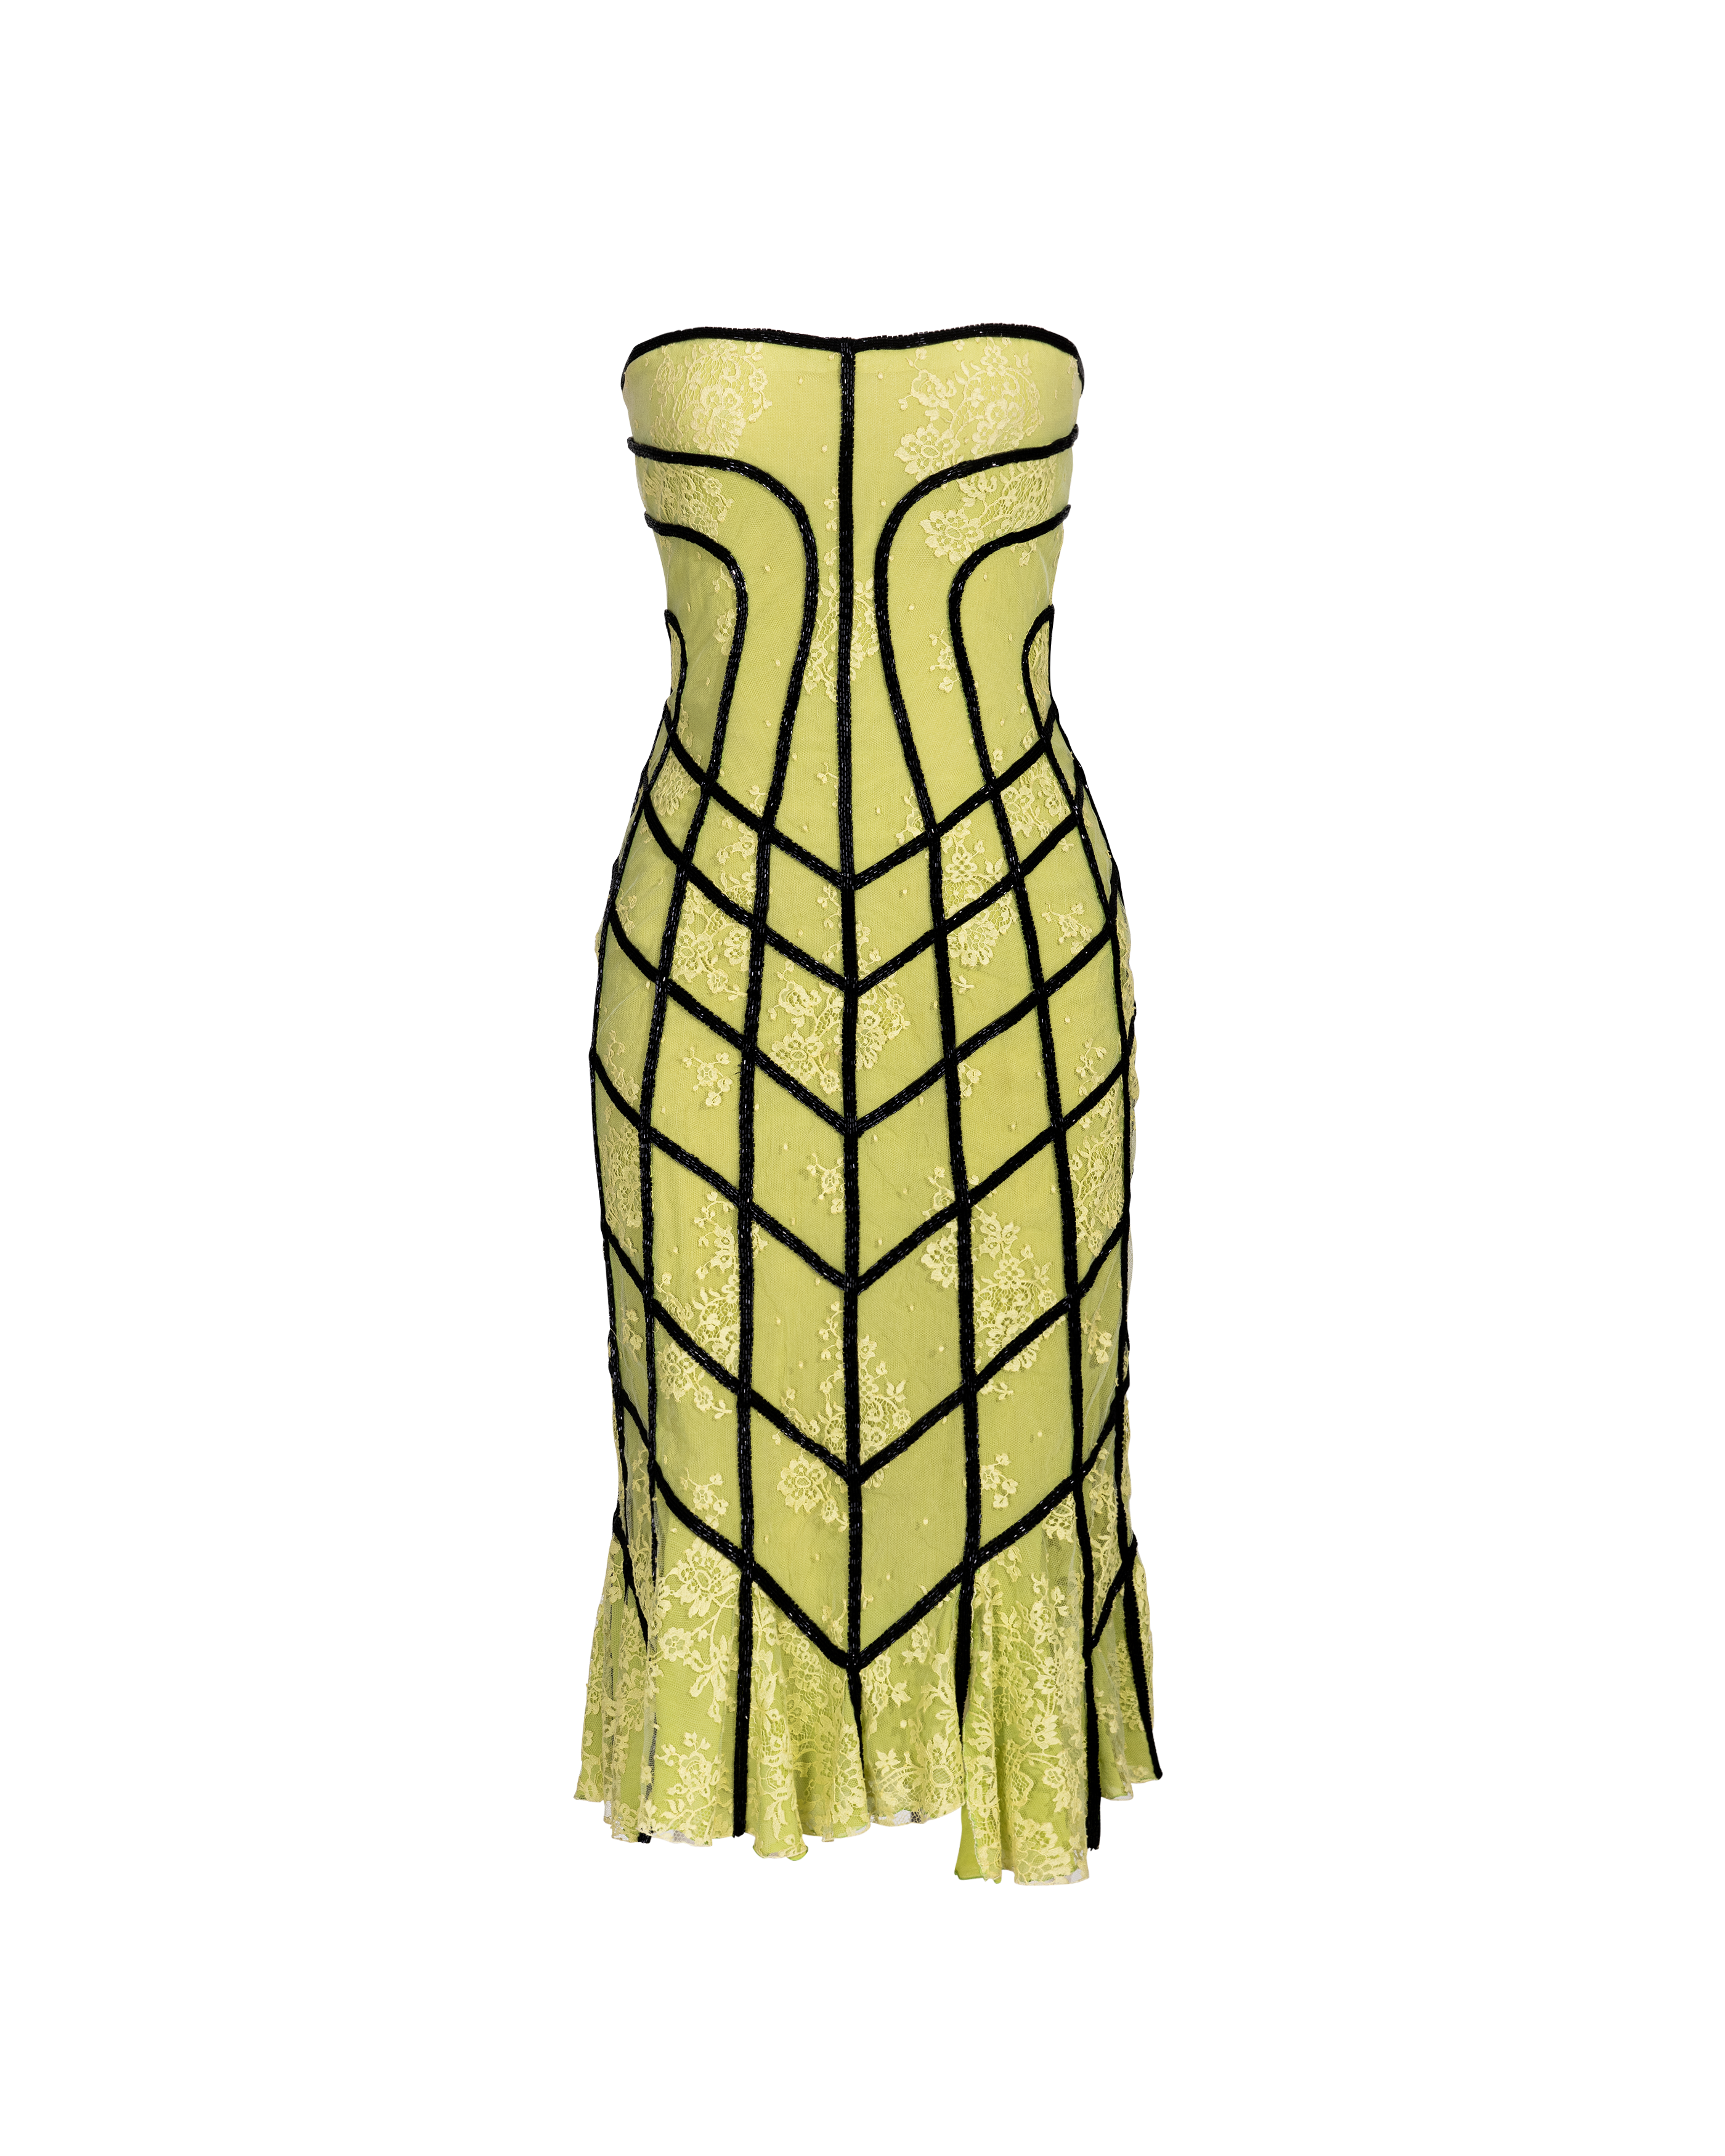 S/S 2001 Haute Couture Green and Black Geometric Embellished Dress